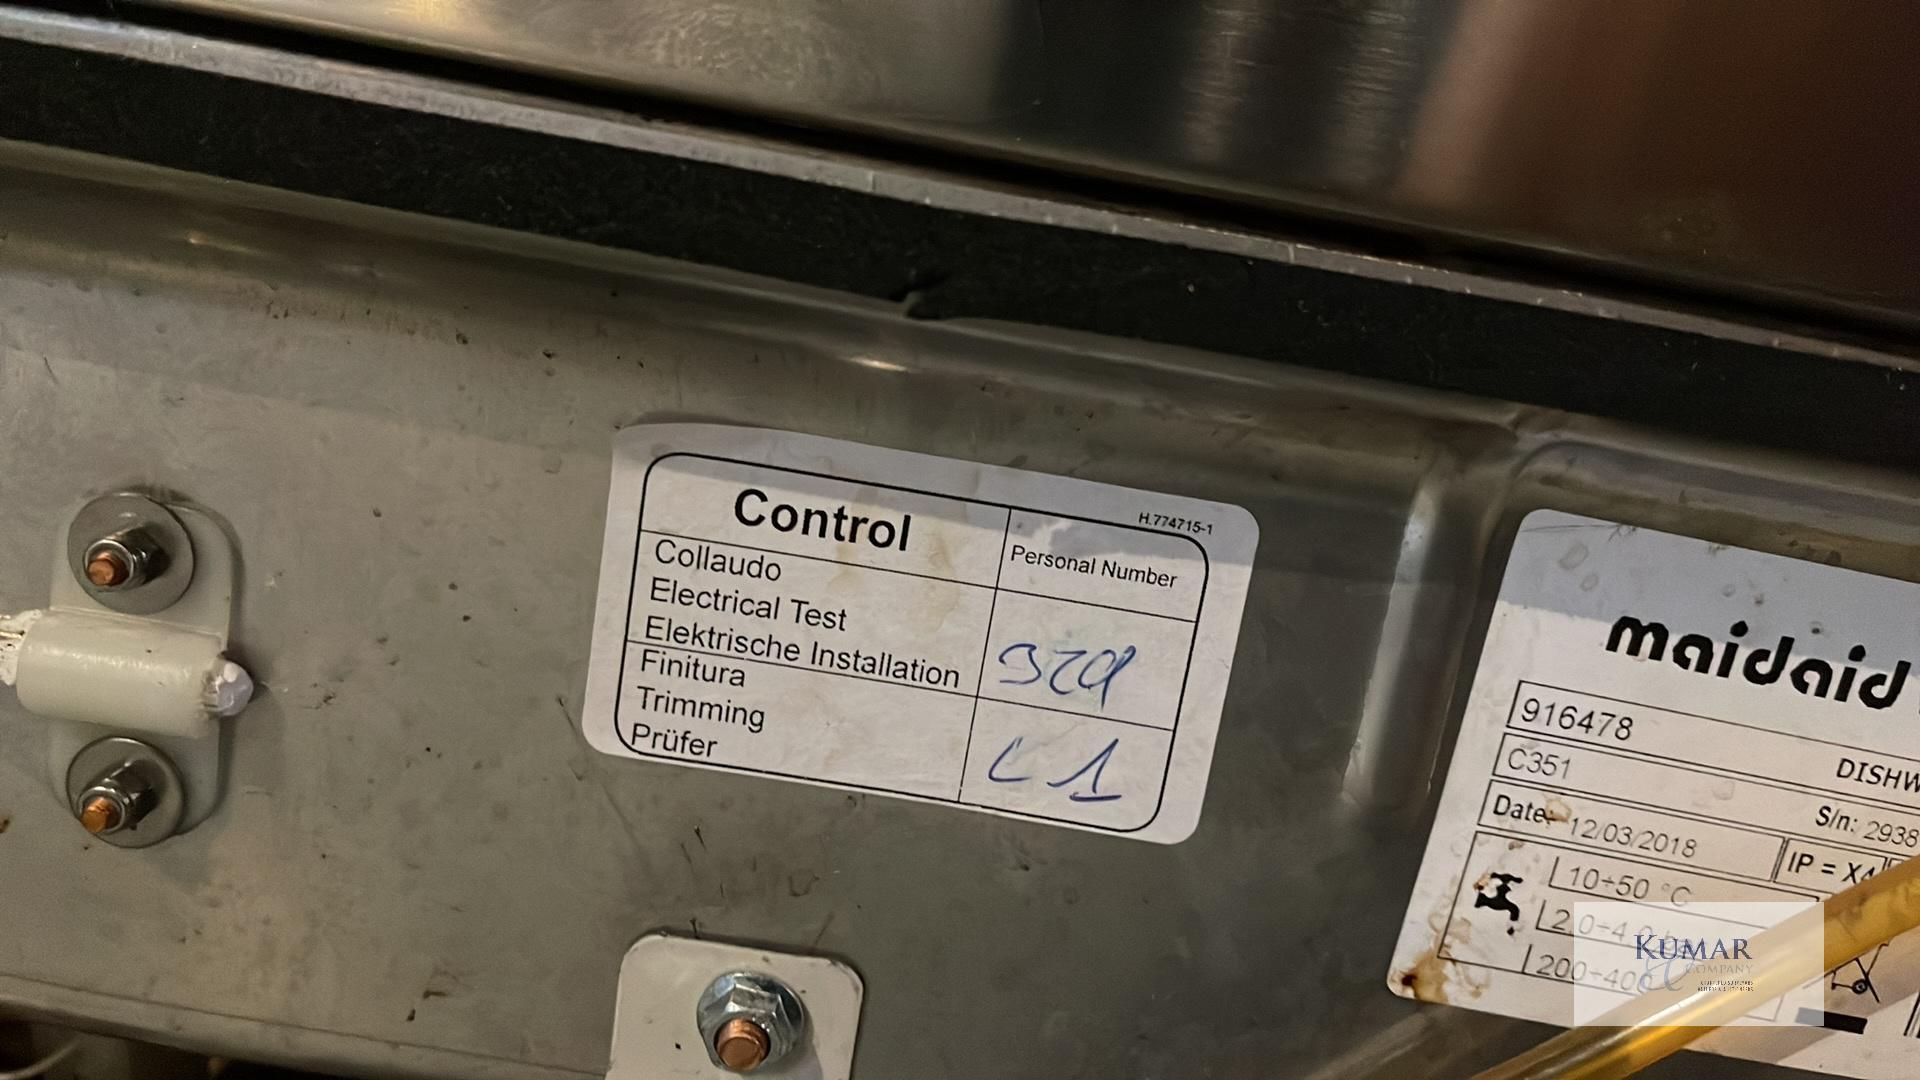 Maidaid C351 Under Counter Glasswasher, Serial No. 916478 (12/03/2018) New Cost Â£700 - Image 3 of 8